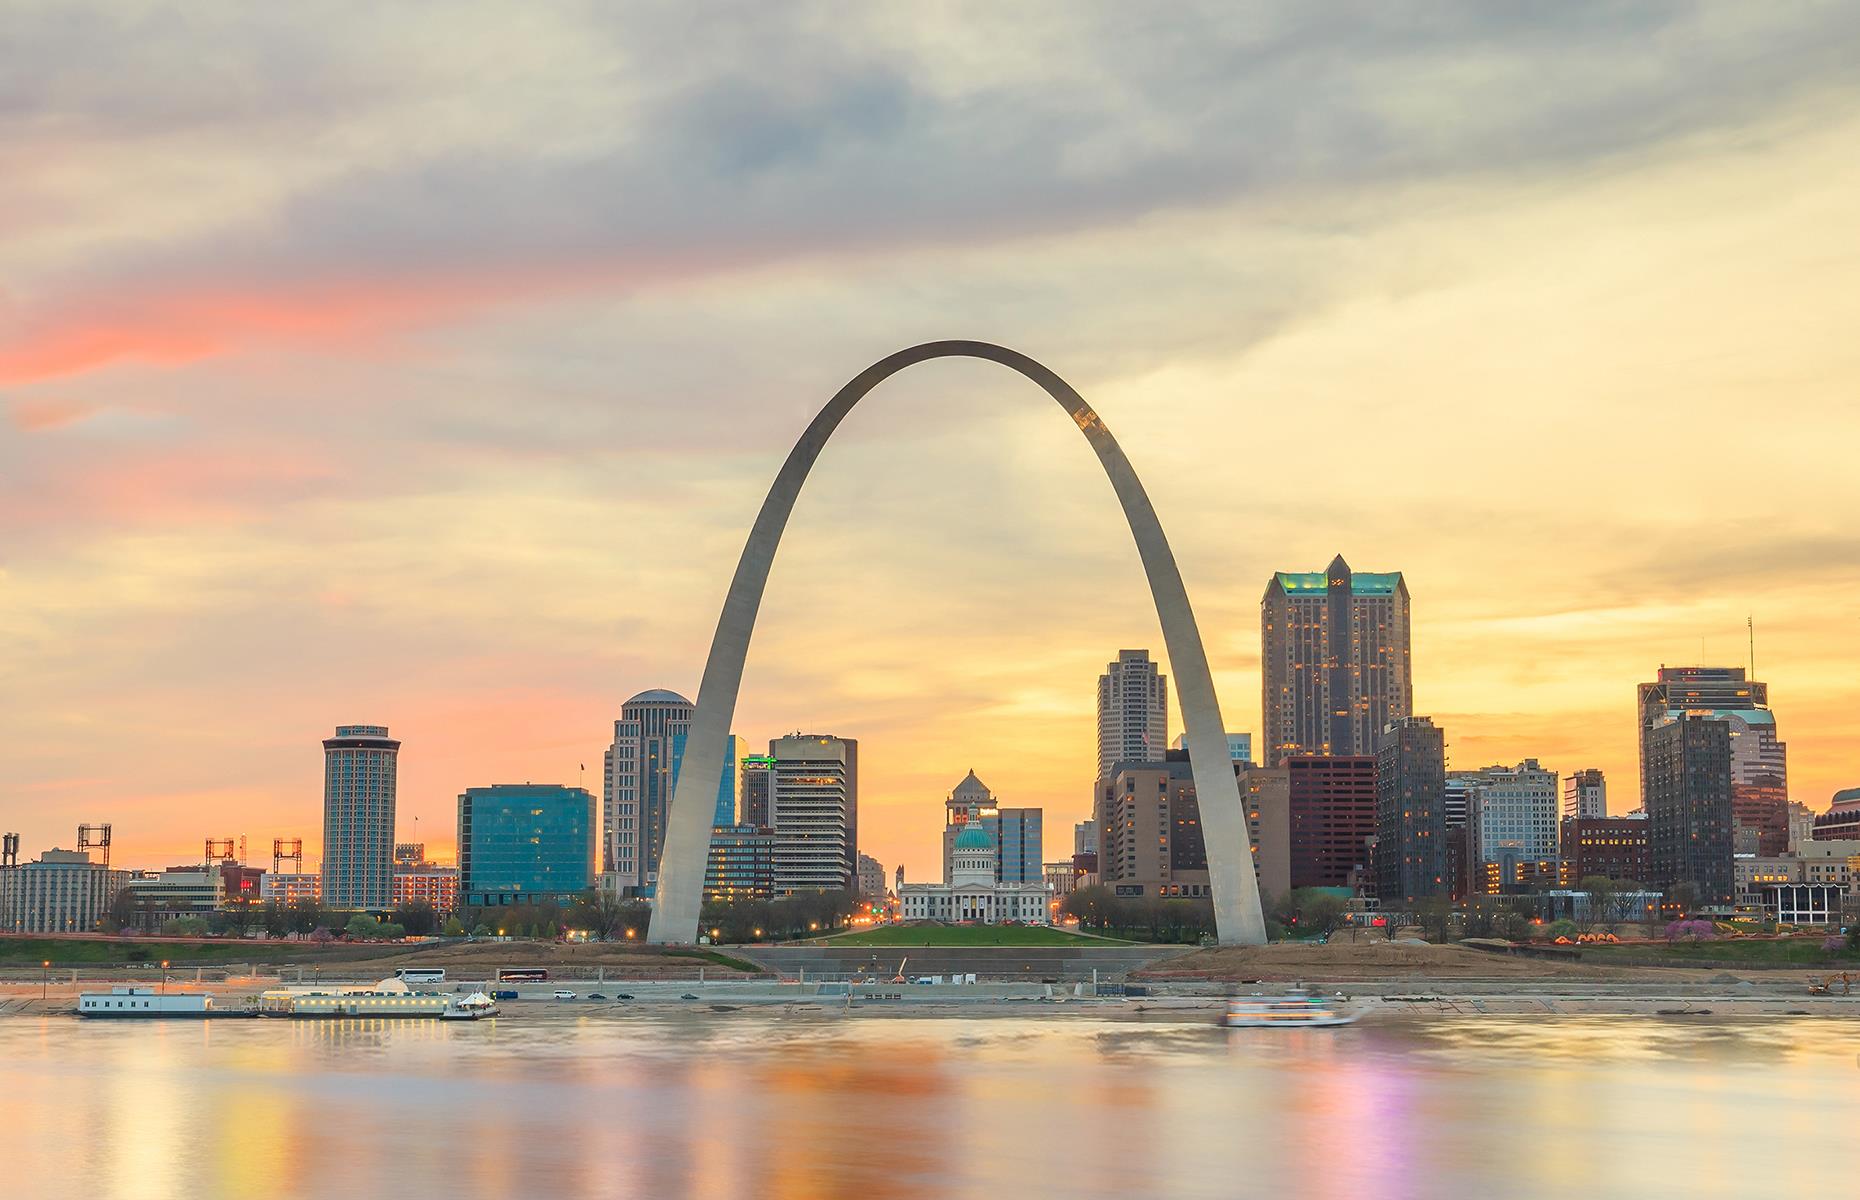 <p>On ocean cruises, the excitement about seeing the local landmark/record-breaking attraction/ancient site quickly dissipates when there’s a one-hour bus journey between you and the site in question. Not so with river cruising, simply because of the increased accessibility. A great example is the iconic arch in St Louis, Missouri (pictured) –  this feat of engineering is just a 10-minute walk from the dock used by river boats.</p>  <p><a href="https://www.loveexploring.com/galleries/156433/the-worlds-oldest-manmade-structures-still-in-use-today?page=1"><strong>Now check out the world's oldest man-made structures still in use today</strong></a></p>